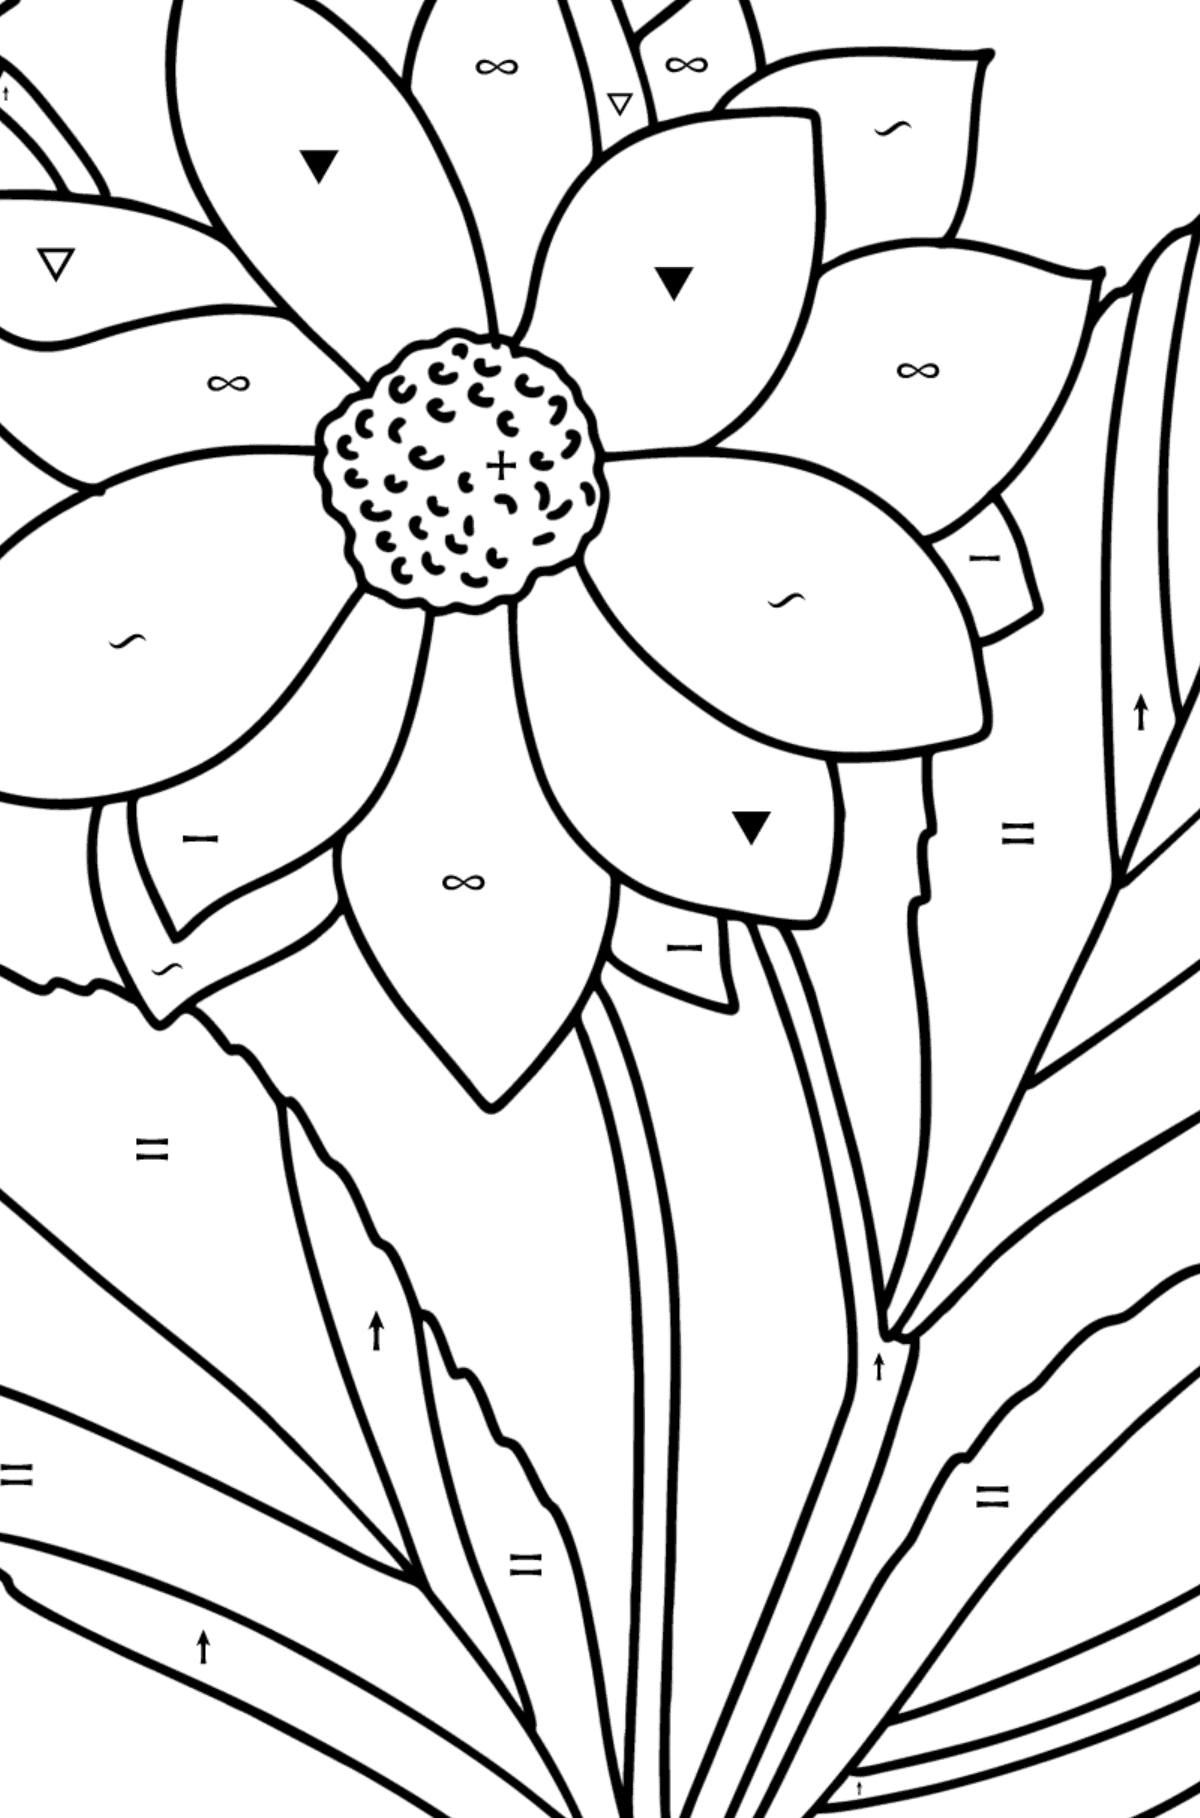 Dahlias coloring page - Coloring by Symbols for Kids